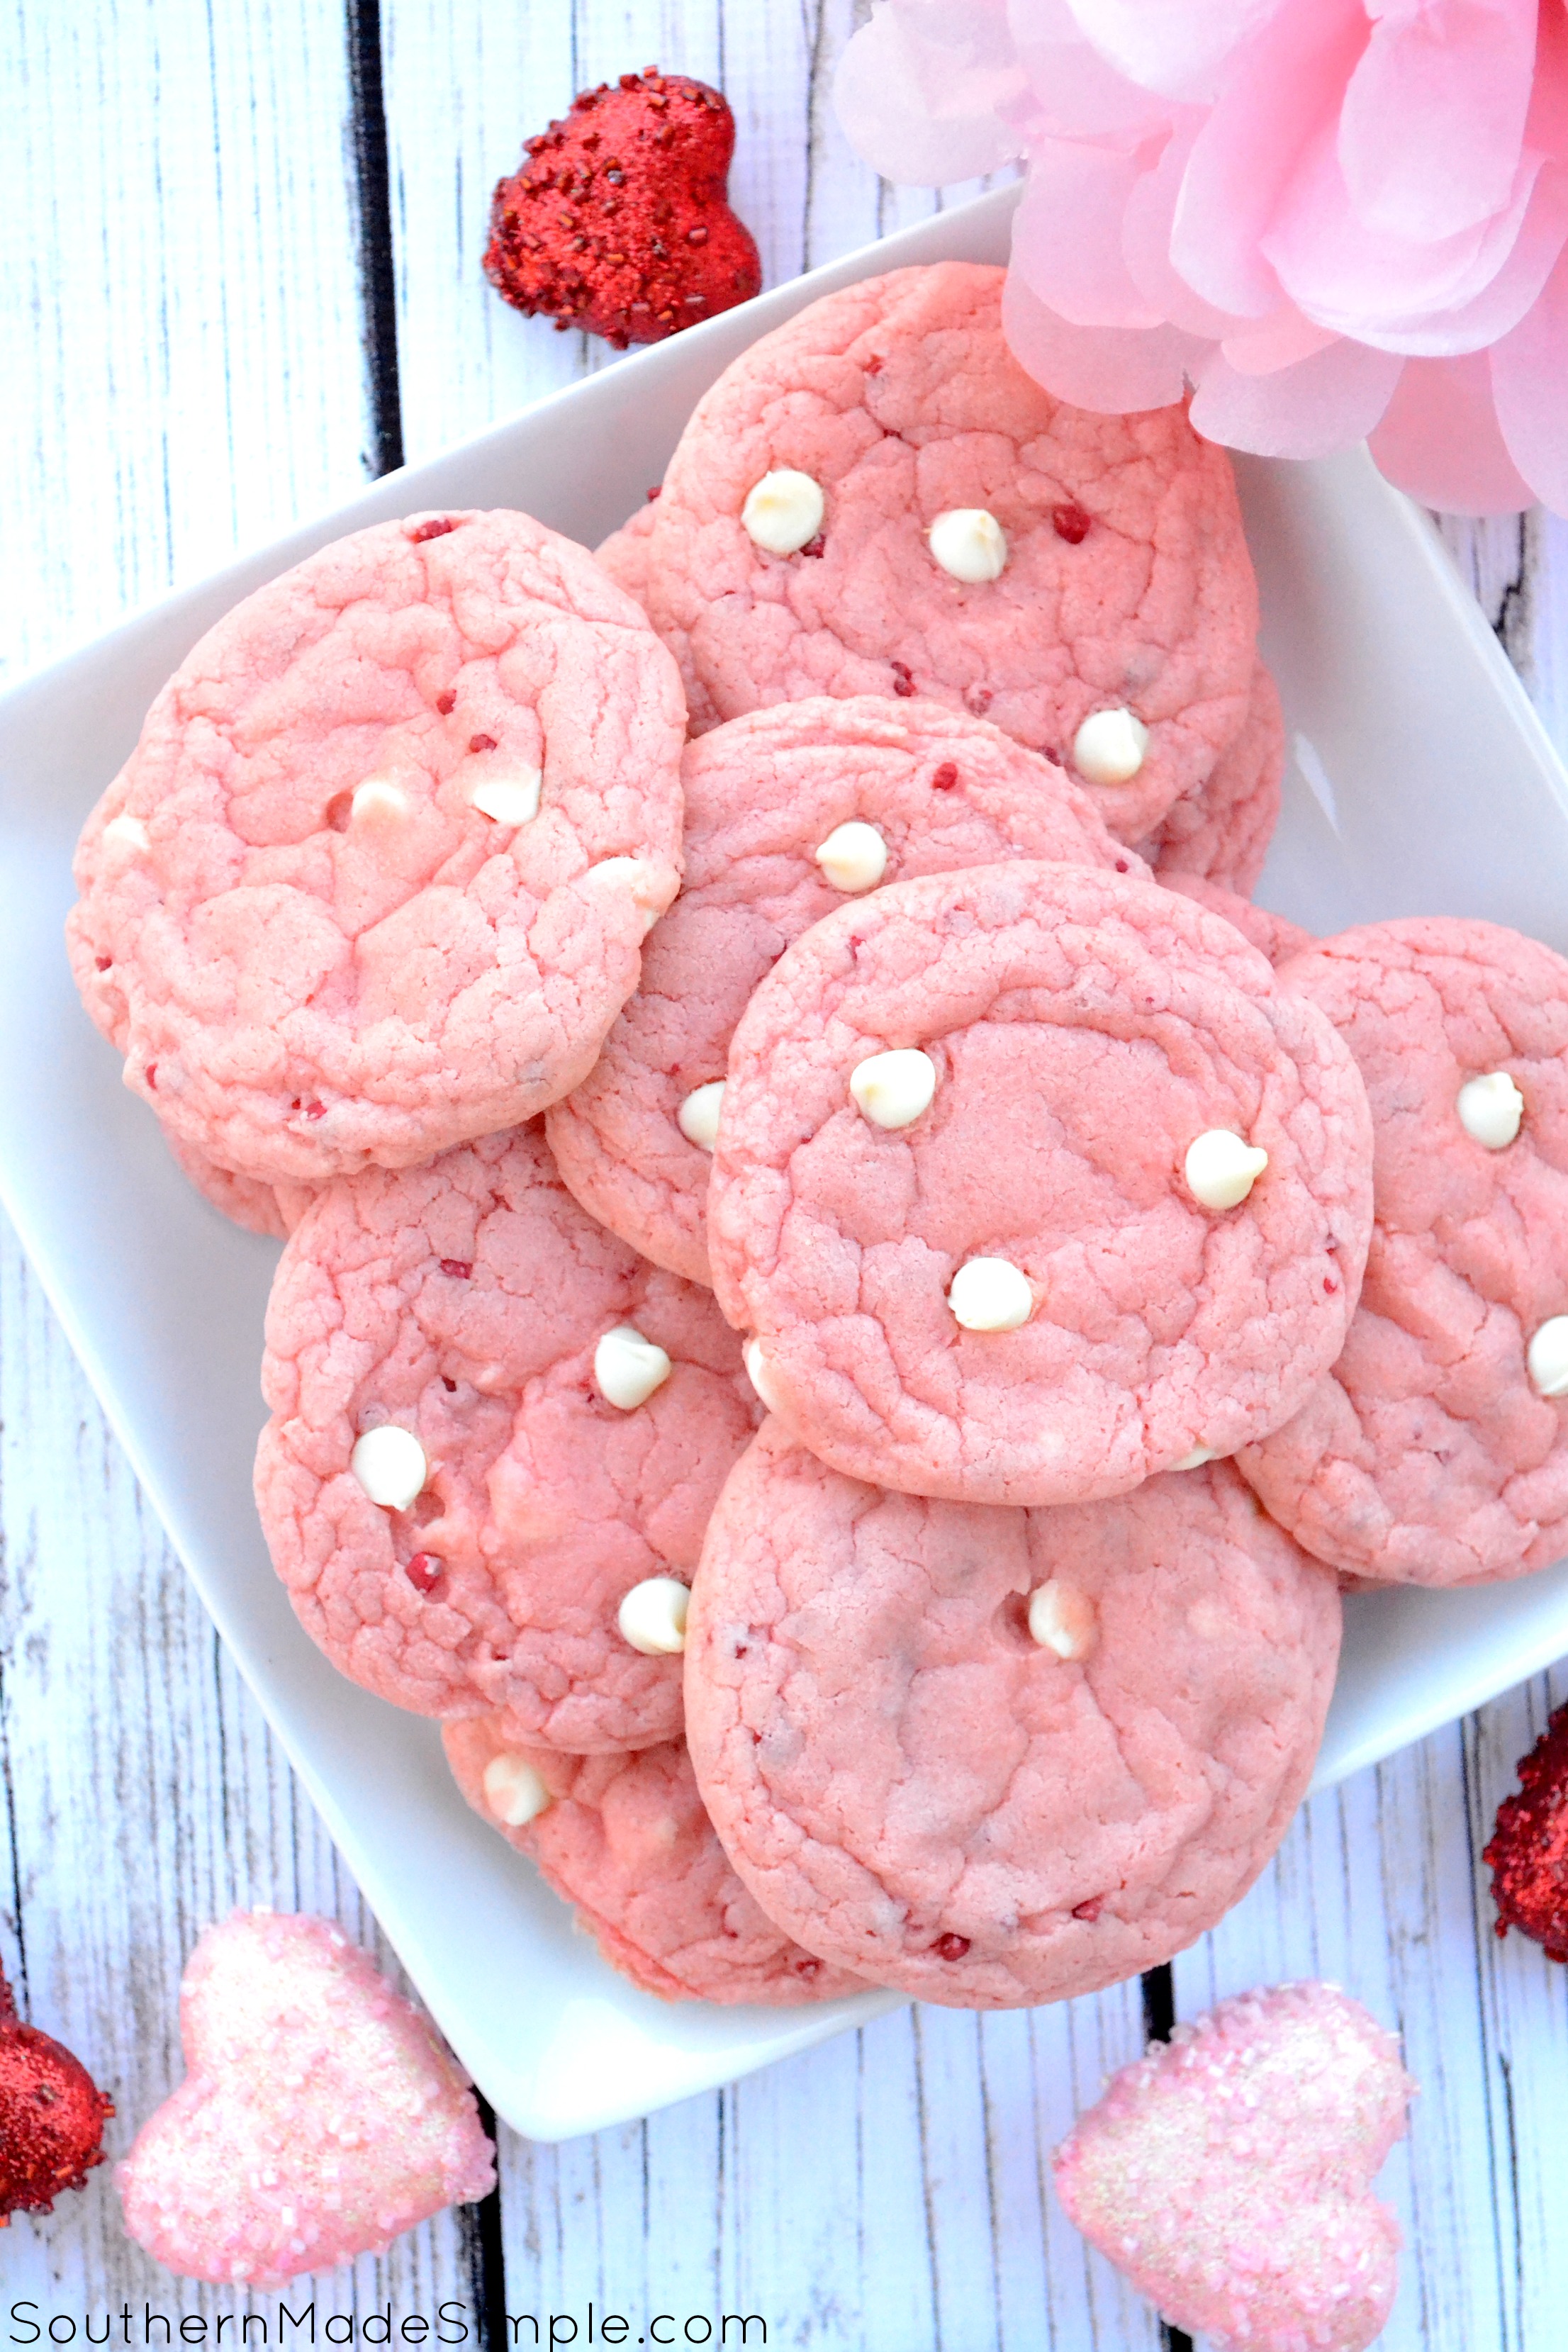 Strawberry Milkshake Cookies - These easy strawberry and white chocolate chip cookies taste just like a smooth strawberry shake, and are perfect for Valentine's Day!